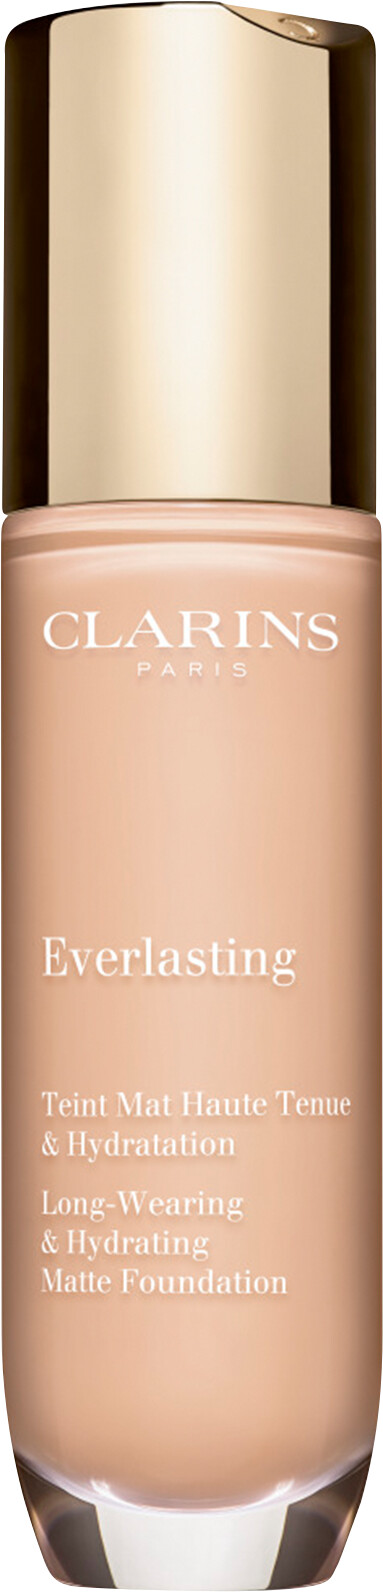 Clarins Everlasting Long-Wearing & Hydrating Matte Foundation 30ml 100C - Lily